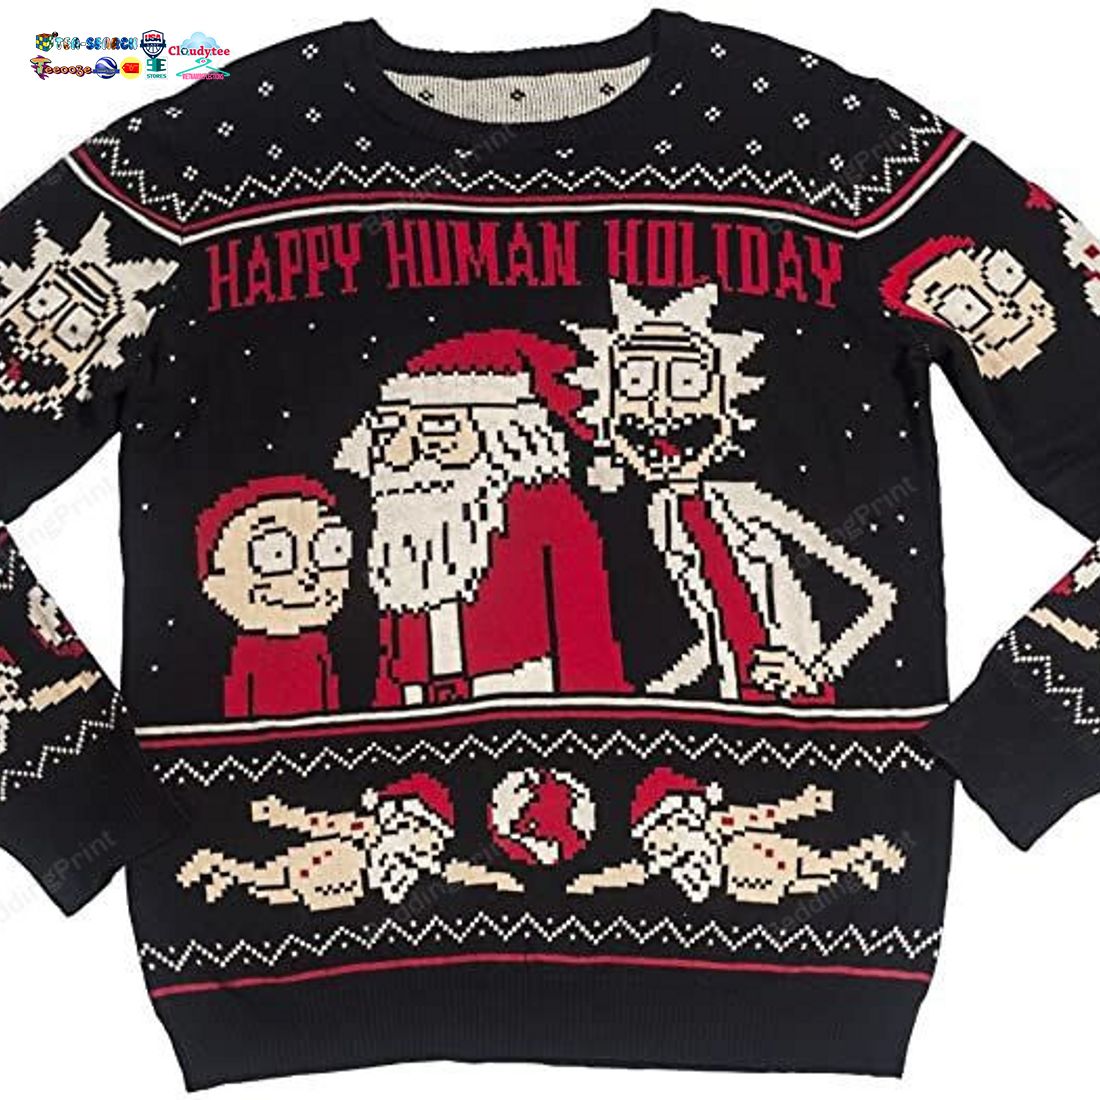 rick-and-morty-happy-human-holiday-ugly-christmas-sweater-1-8MwC7.jpg